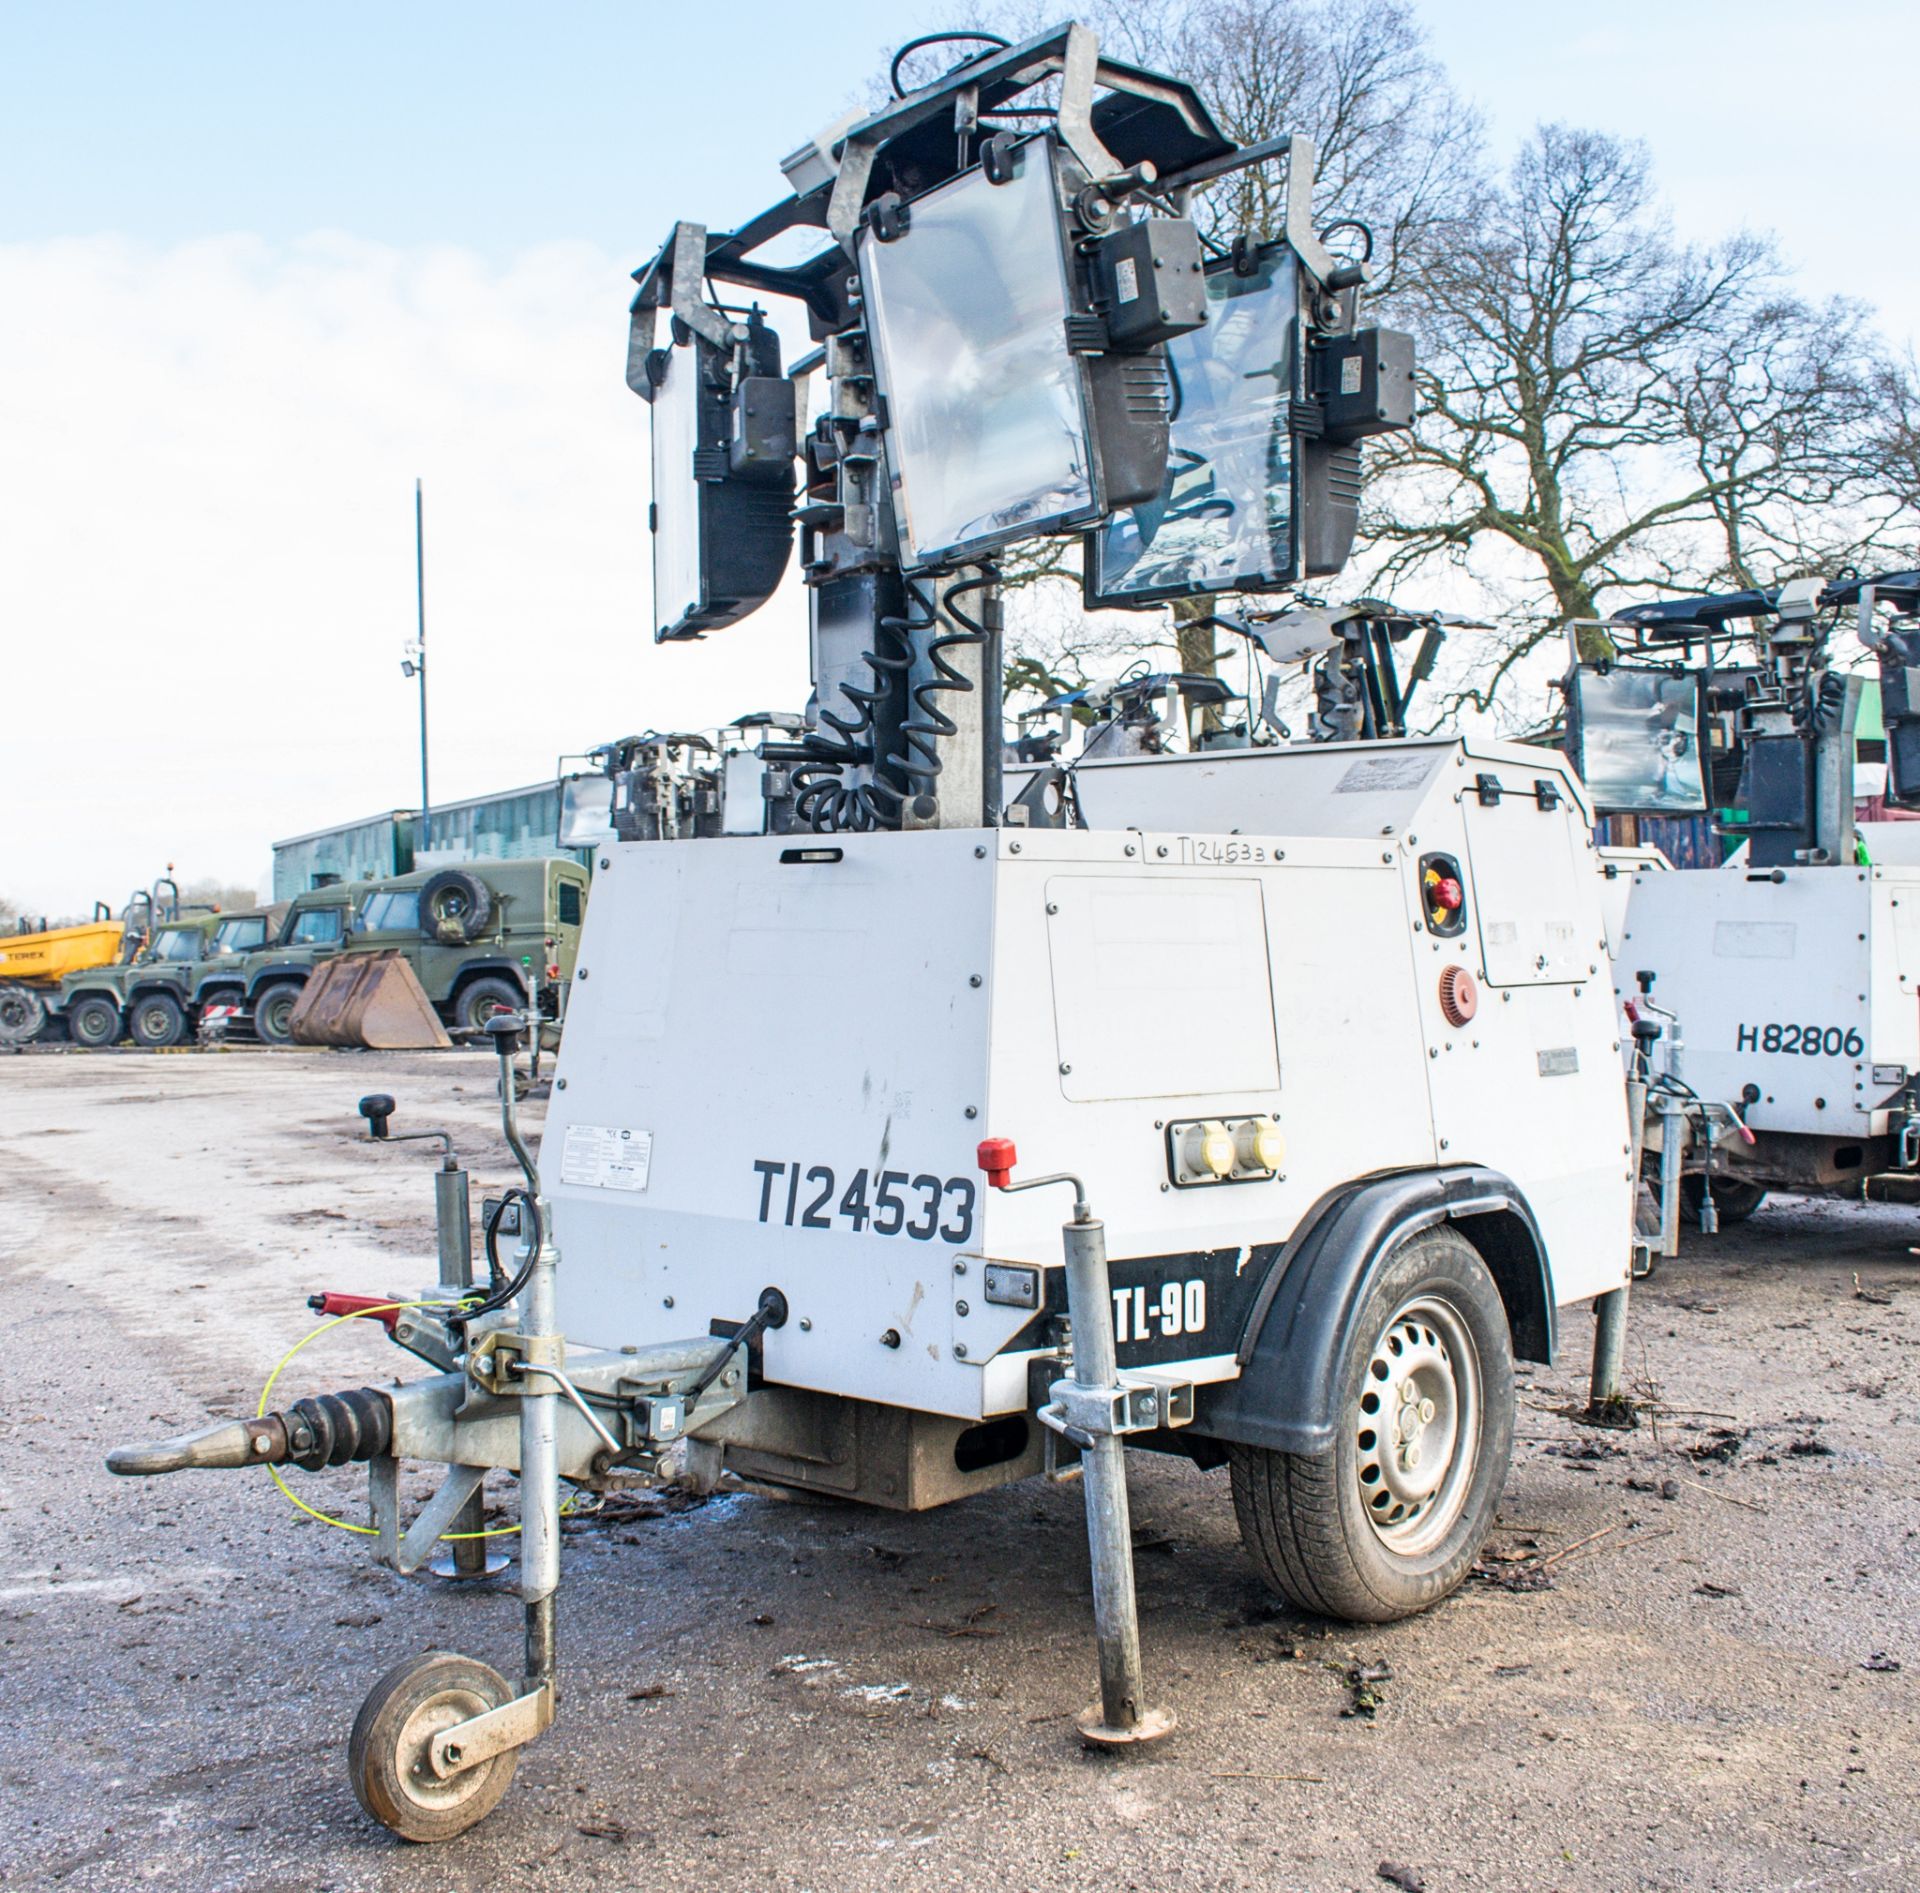 SMC TL-90 diesel driven mobile lighting tower Year: 2011 S/N: 19050 Recorded Hours: T127387